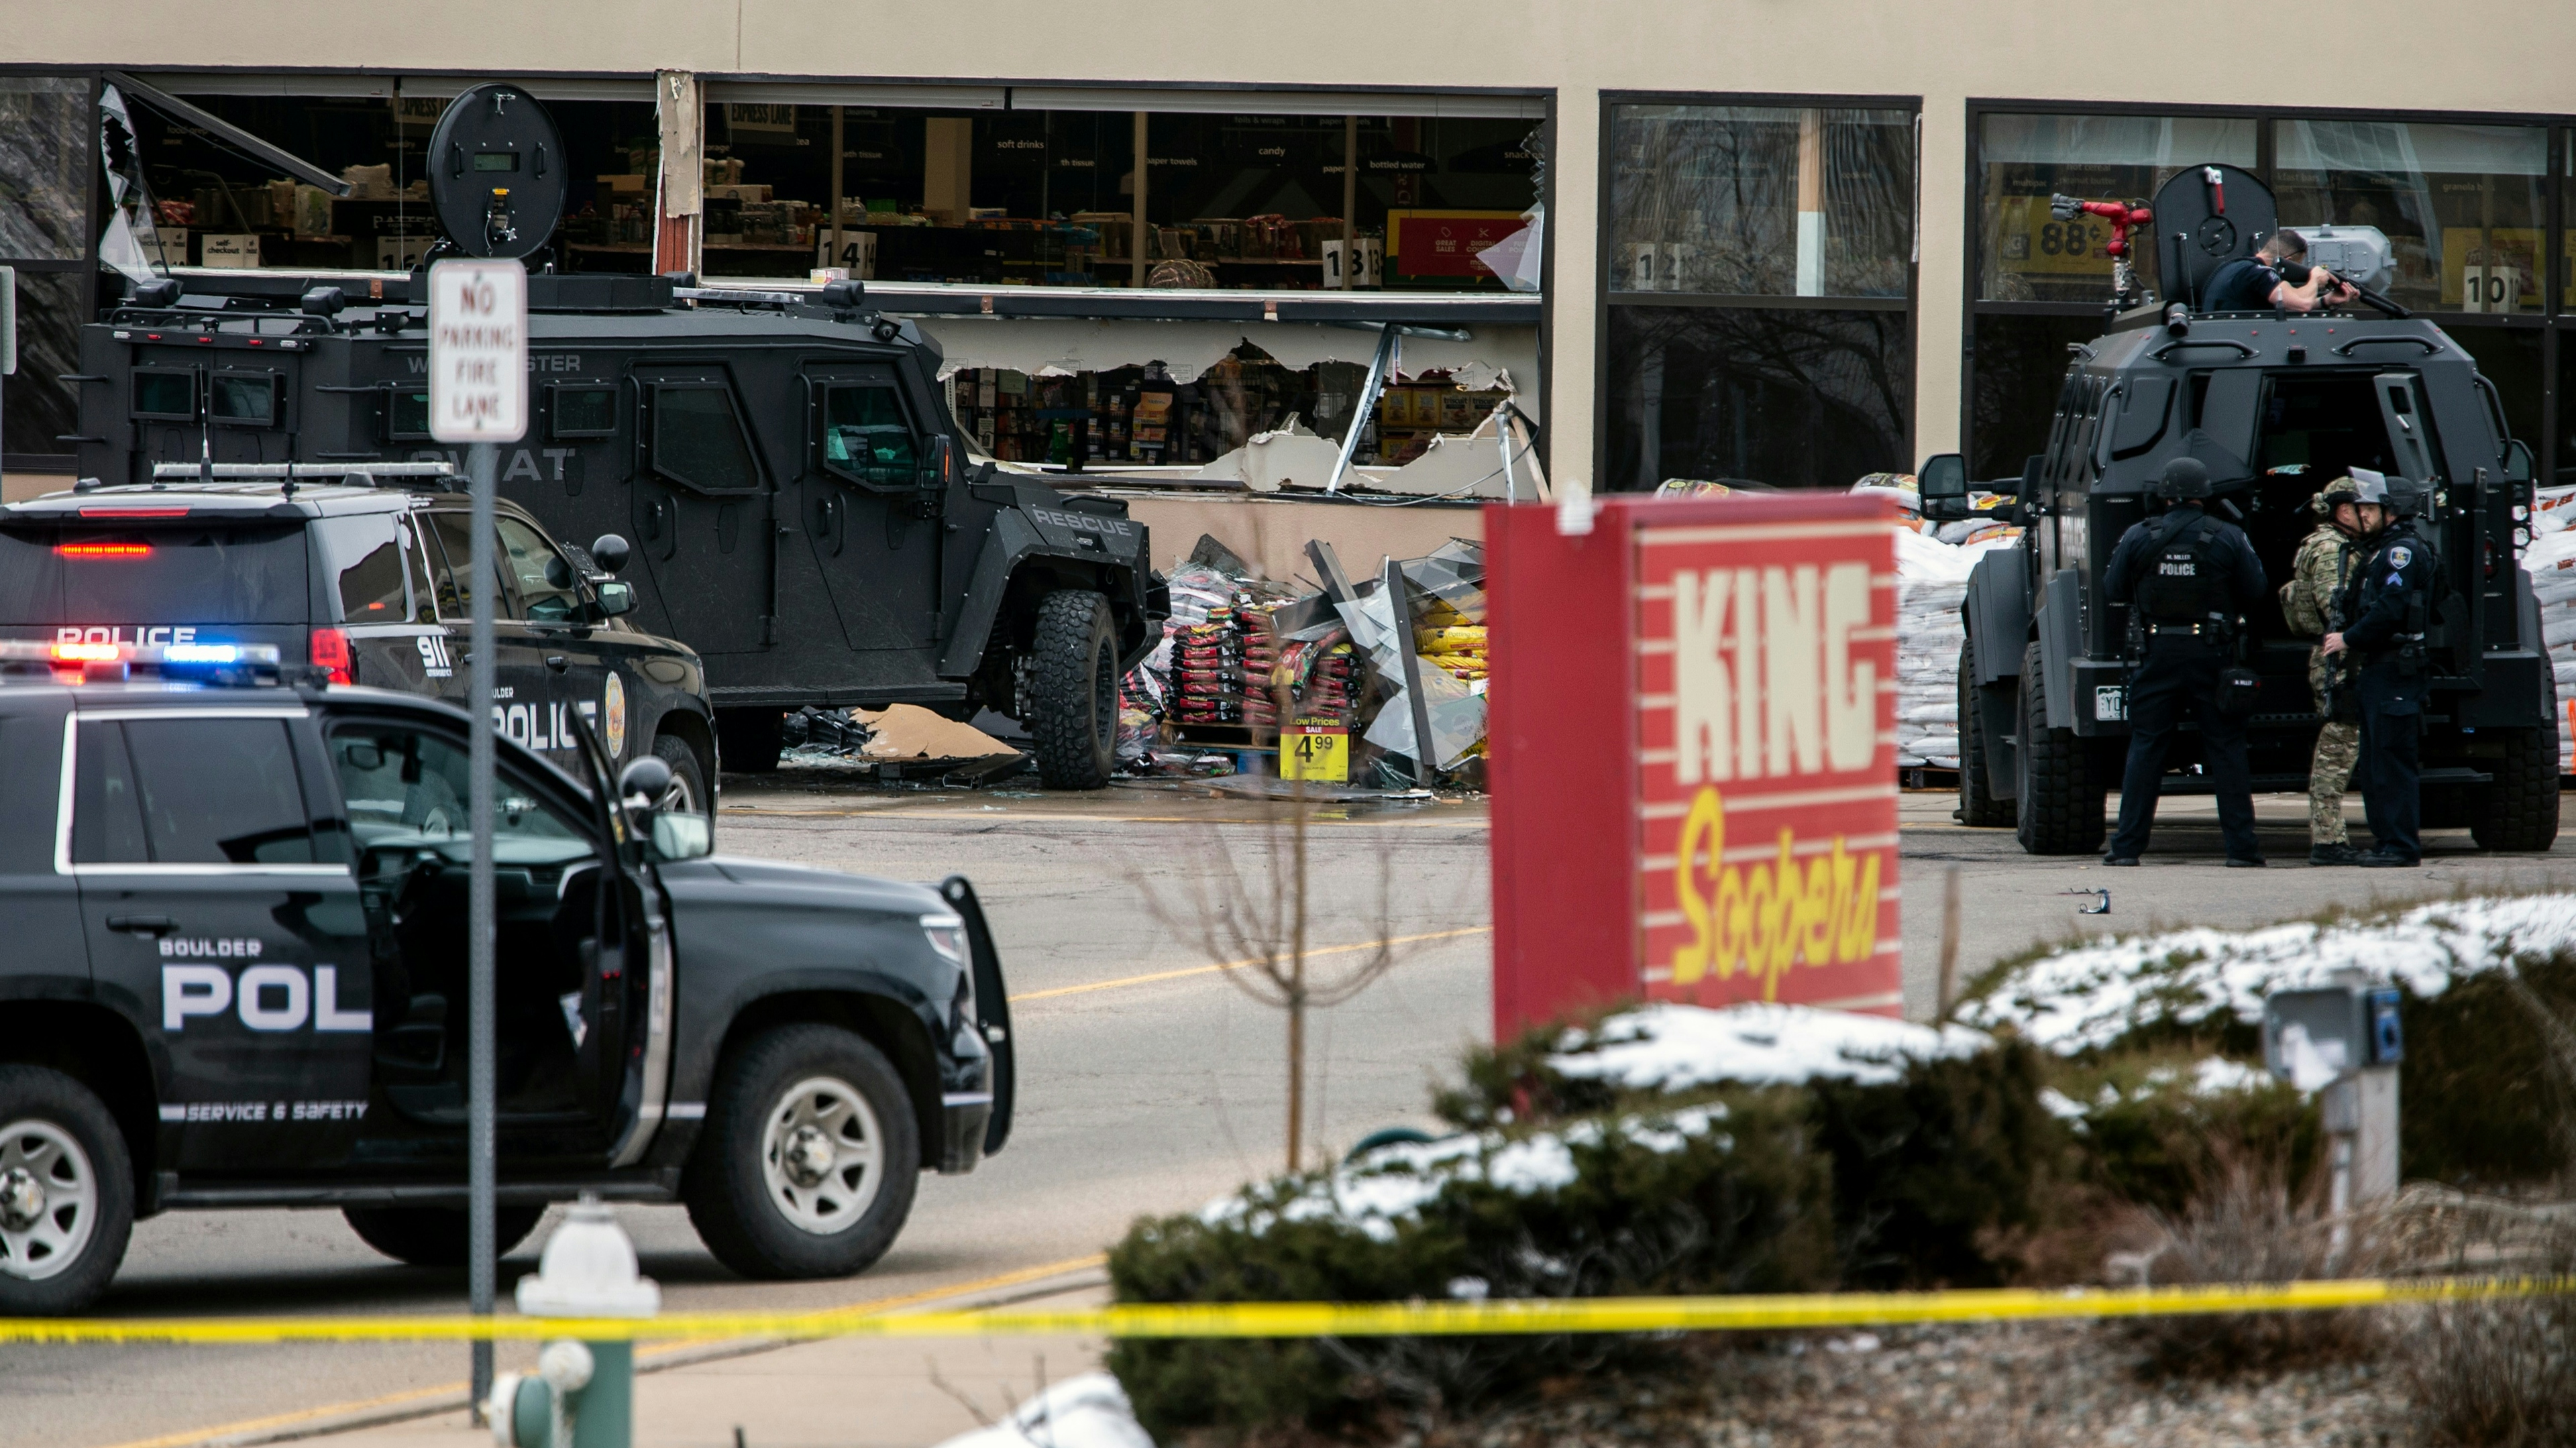 Smashed windows are left at the scene after a gunman opened fire at a King Sooper's grocery store on March 22, 2021 in Boulder, Colorado